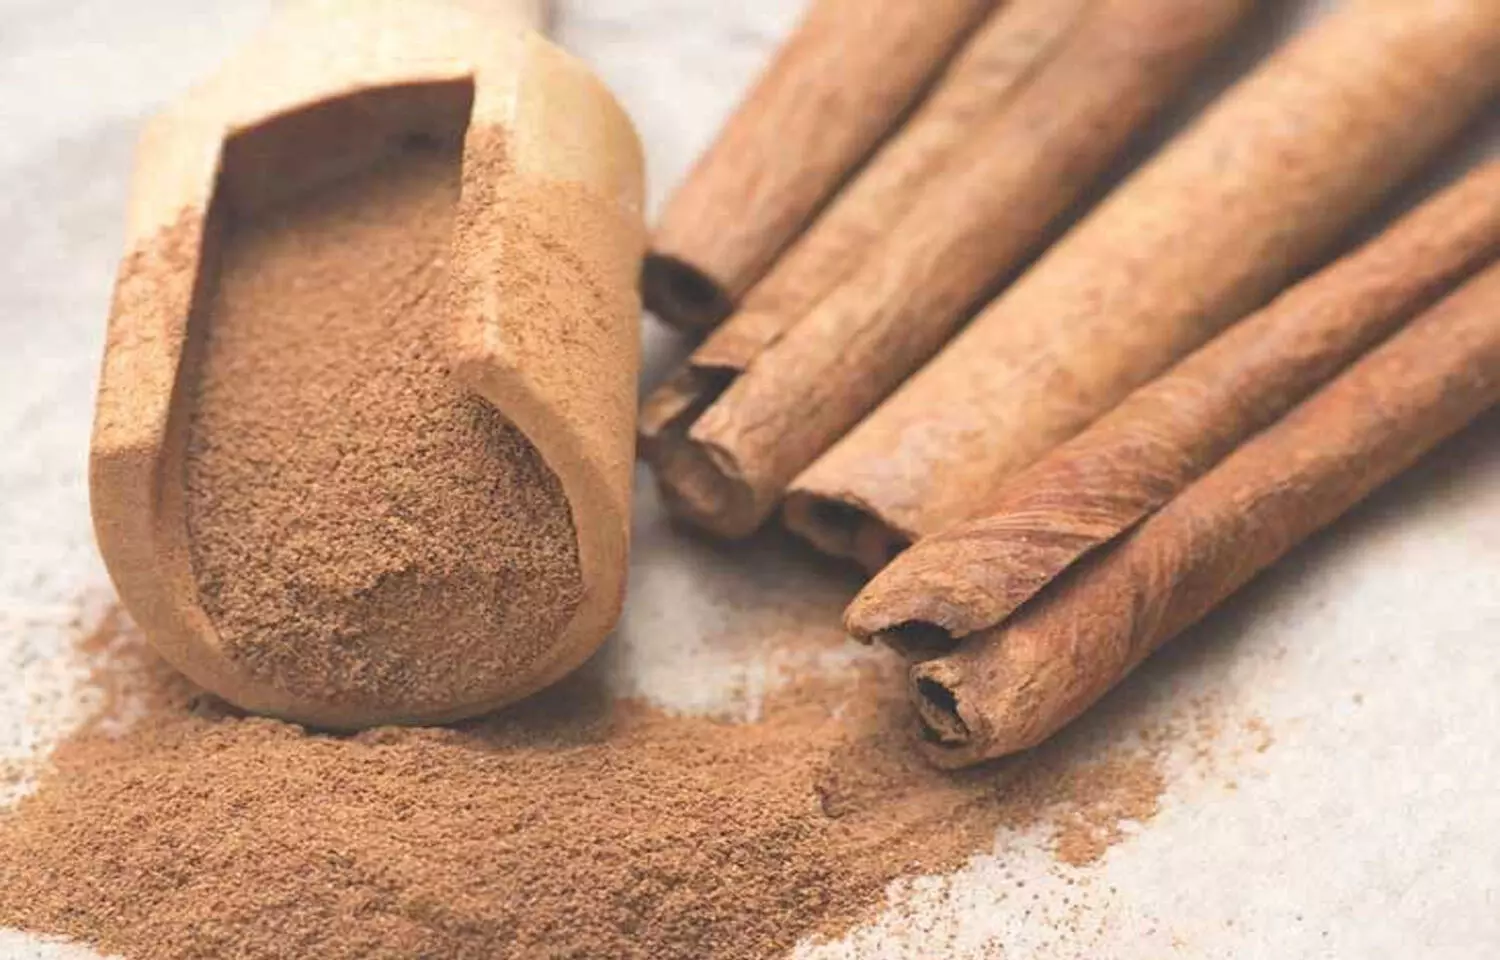 Is cinnamon intake beneficial for type 2 diabetes patients? Study sheds light